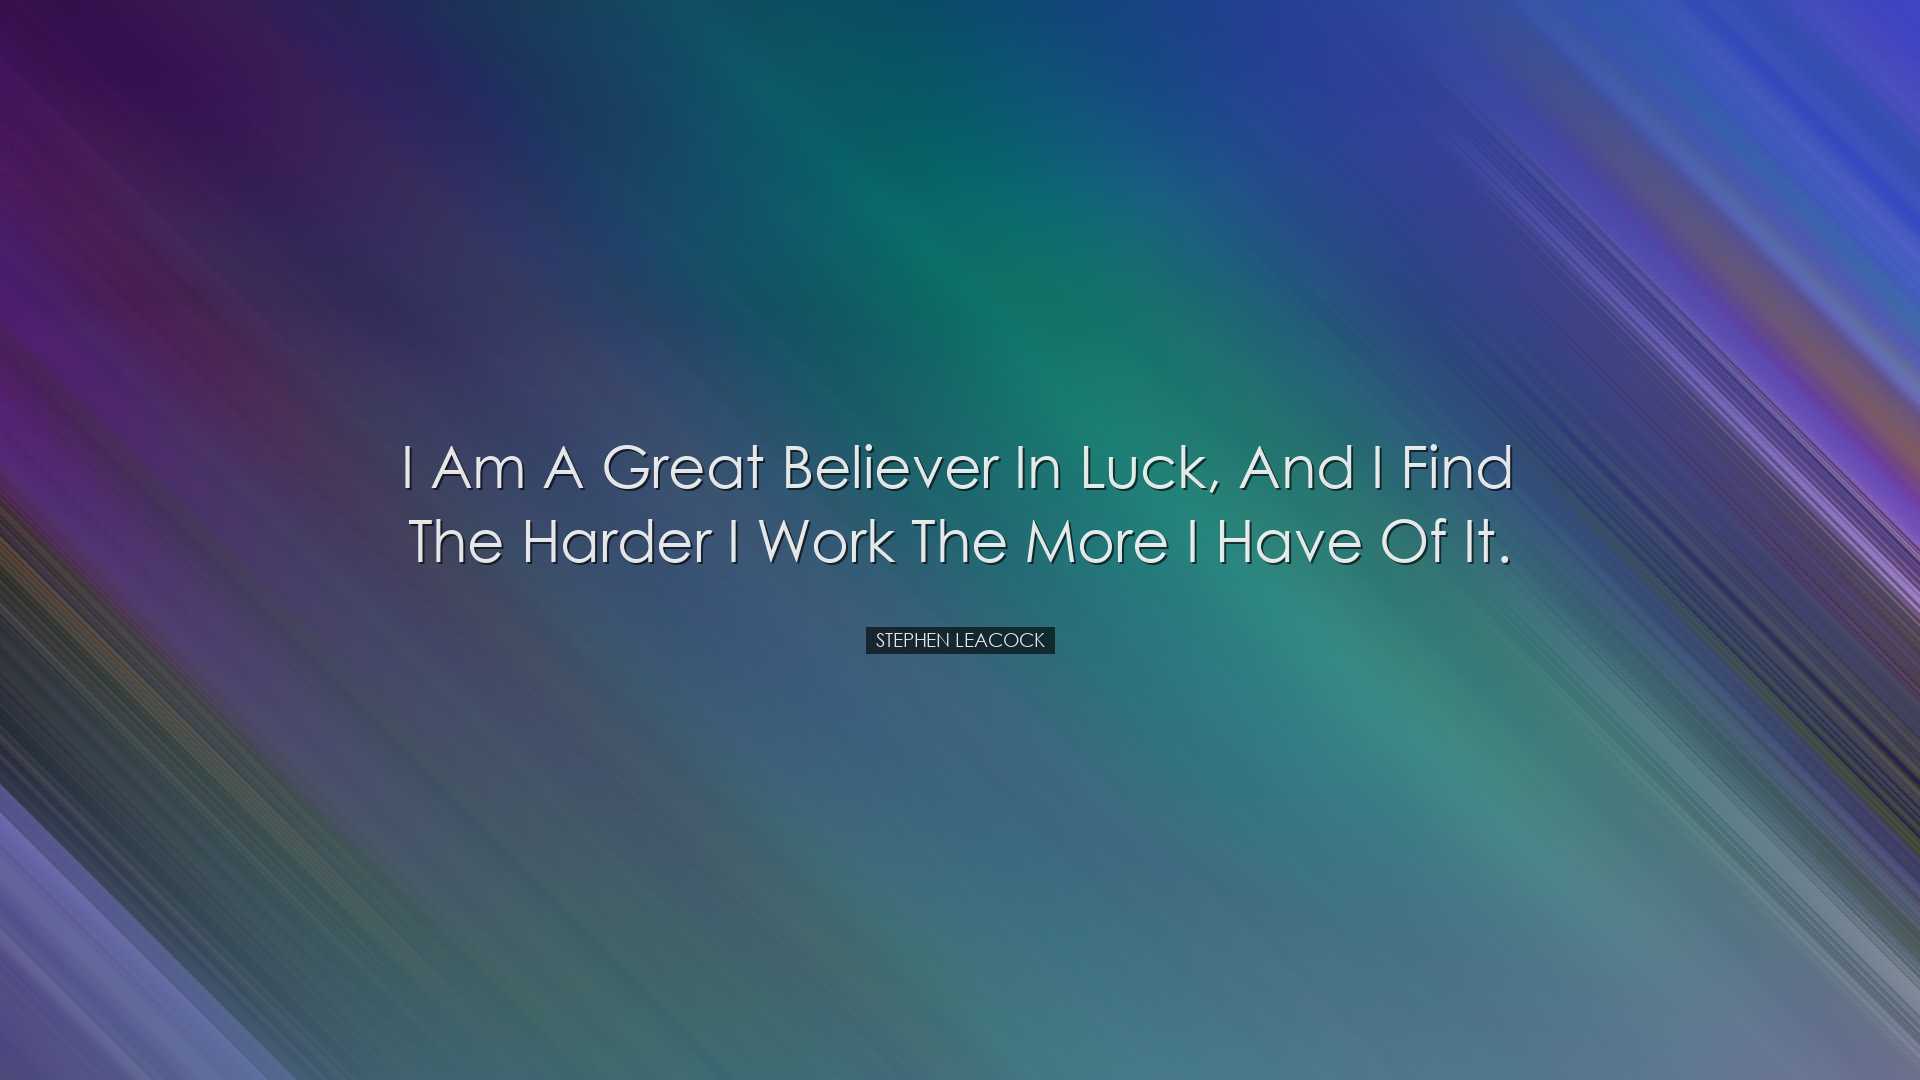 I am a great believer in luck, and I find the harder I work the mo